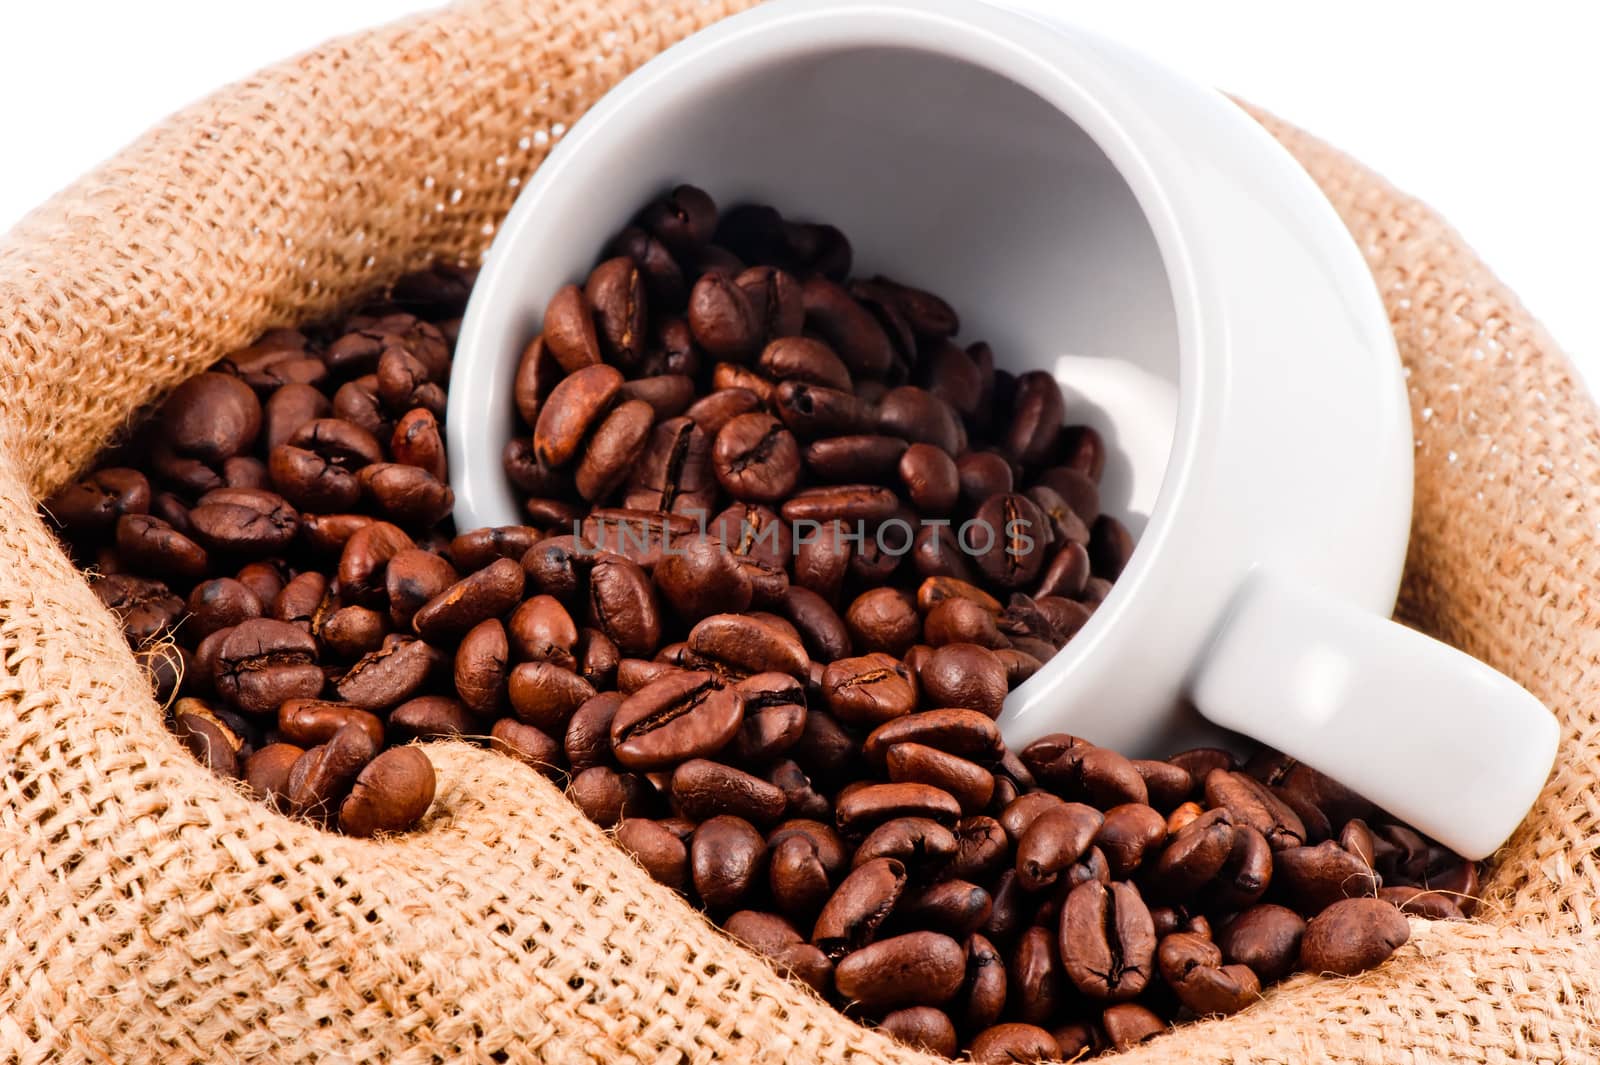 White cup in a bag of coffee beans